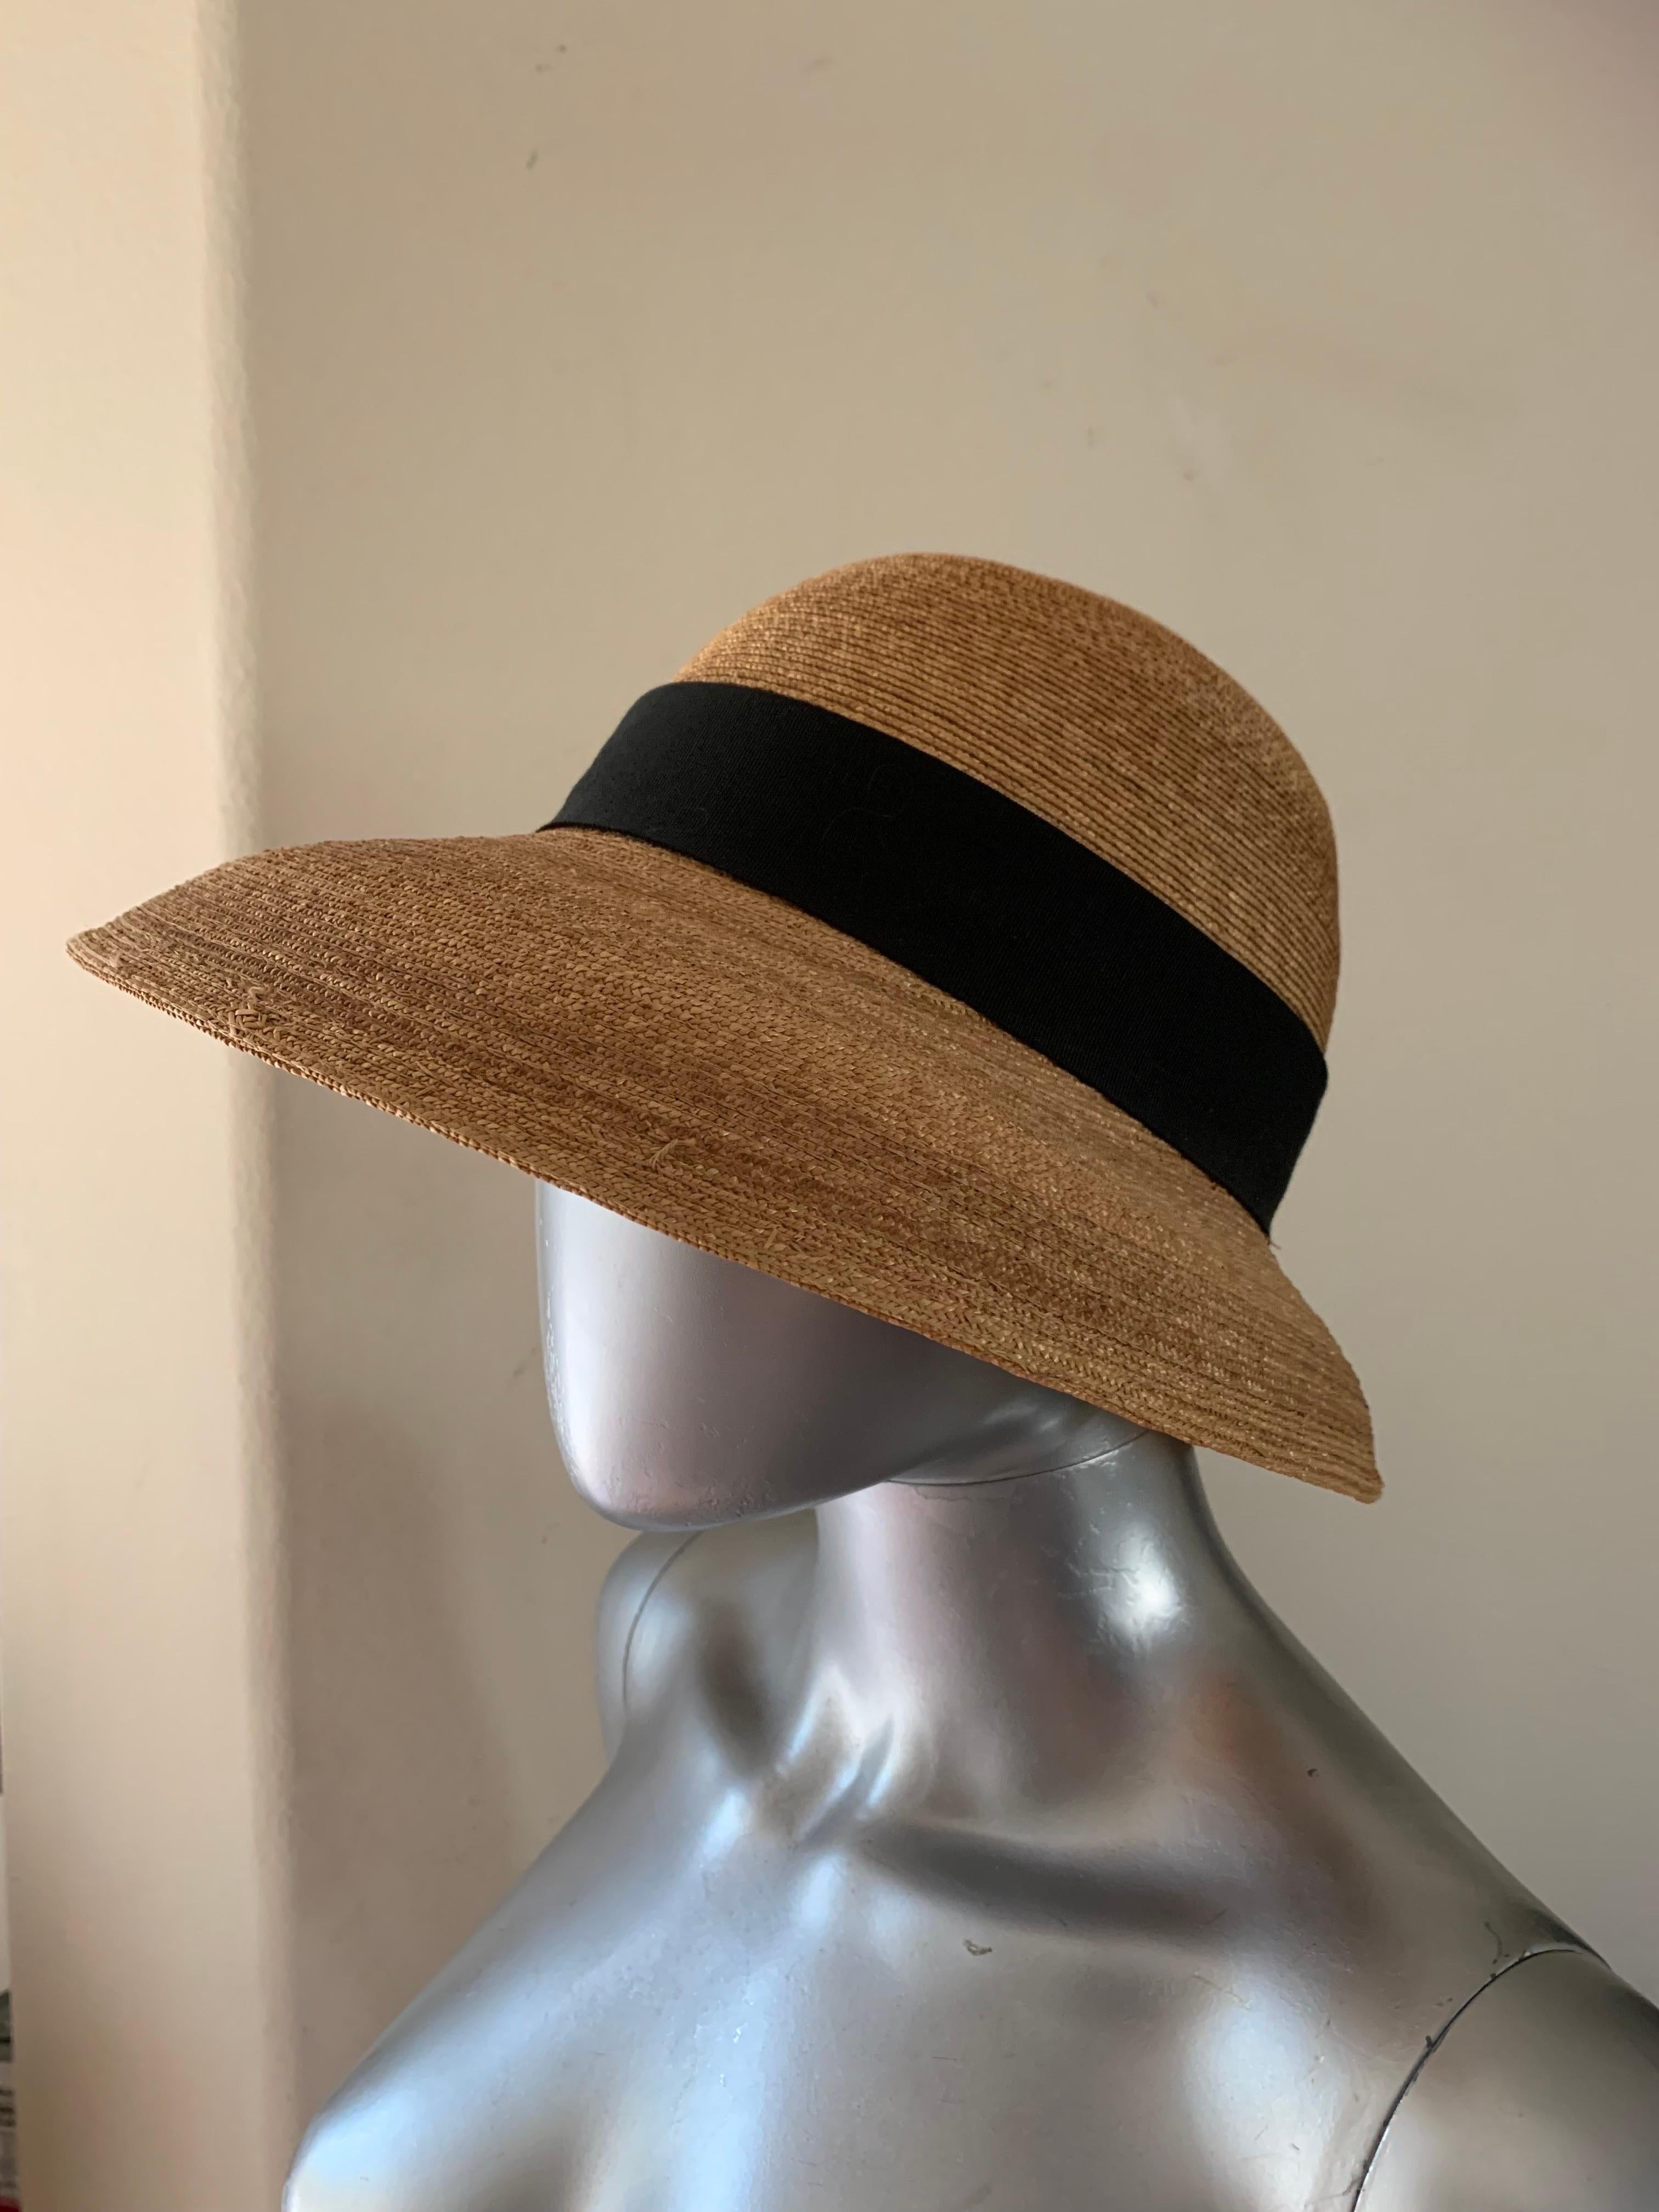 Tracey Tooker Straw Boater Hat with Black Grosgrain Bow NWOT For Sale 1